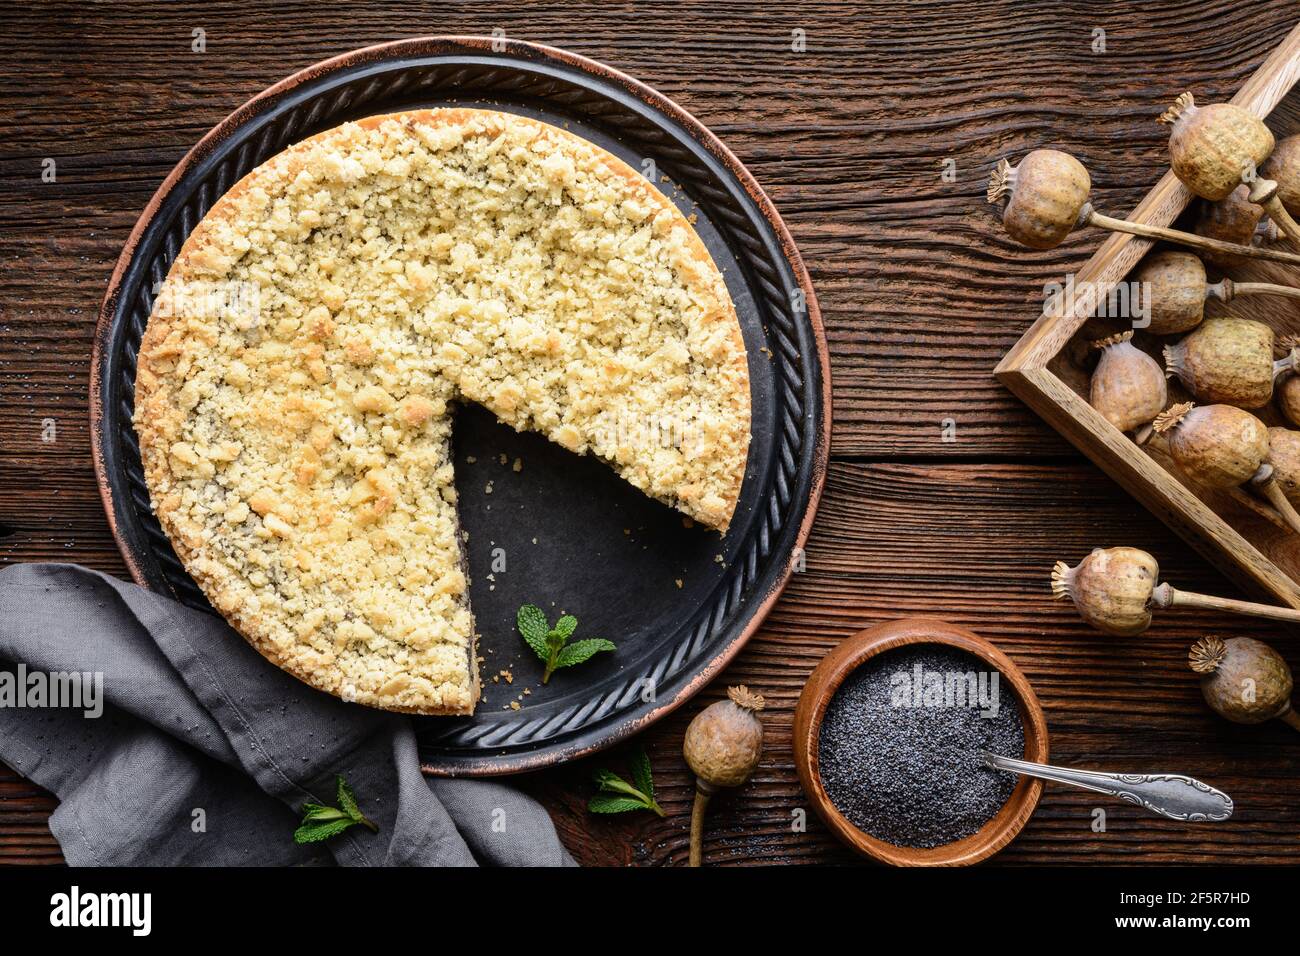 Mohnkuchen, German poppy seed cake topped with crunchy streusel on rustic wooden background Stock Photo